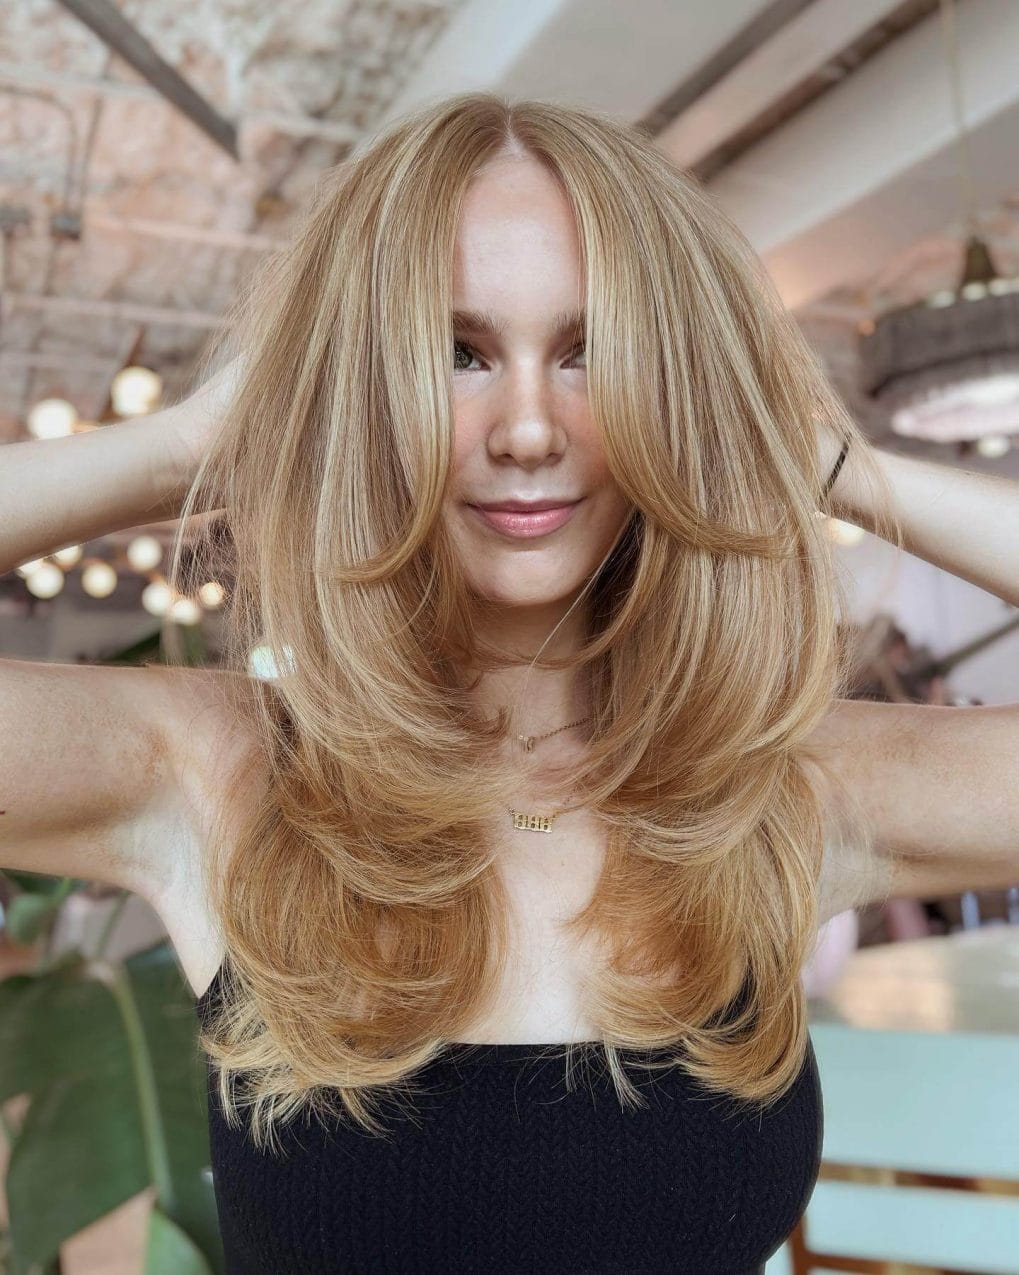 Blonde hair with 90's contour and long layers in a voluminous blowout.